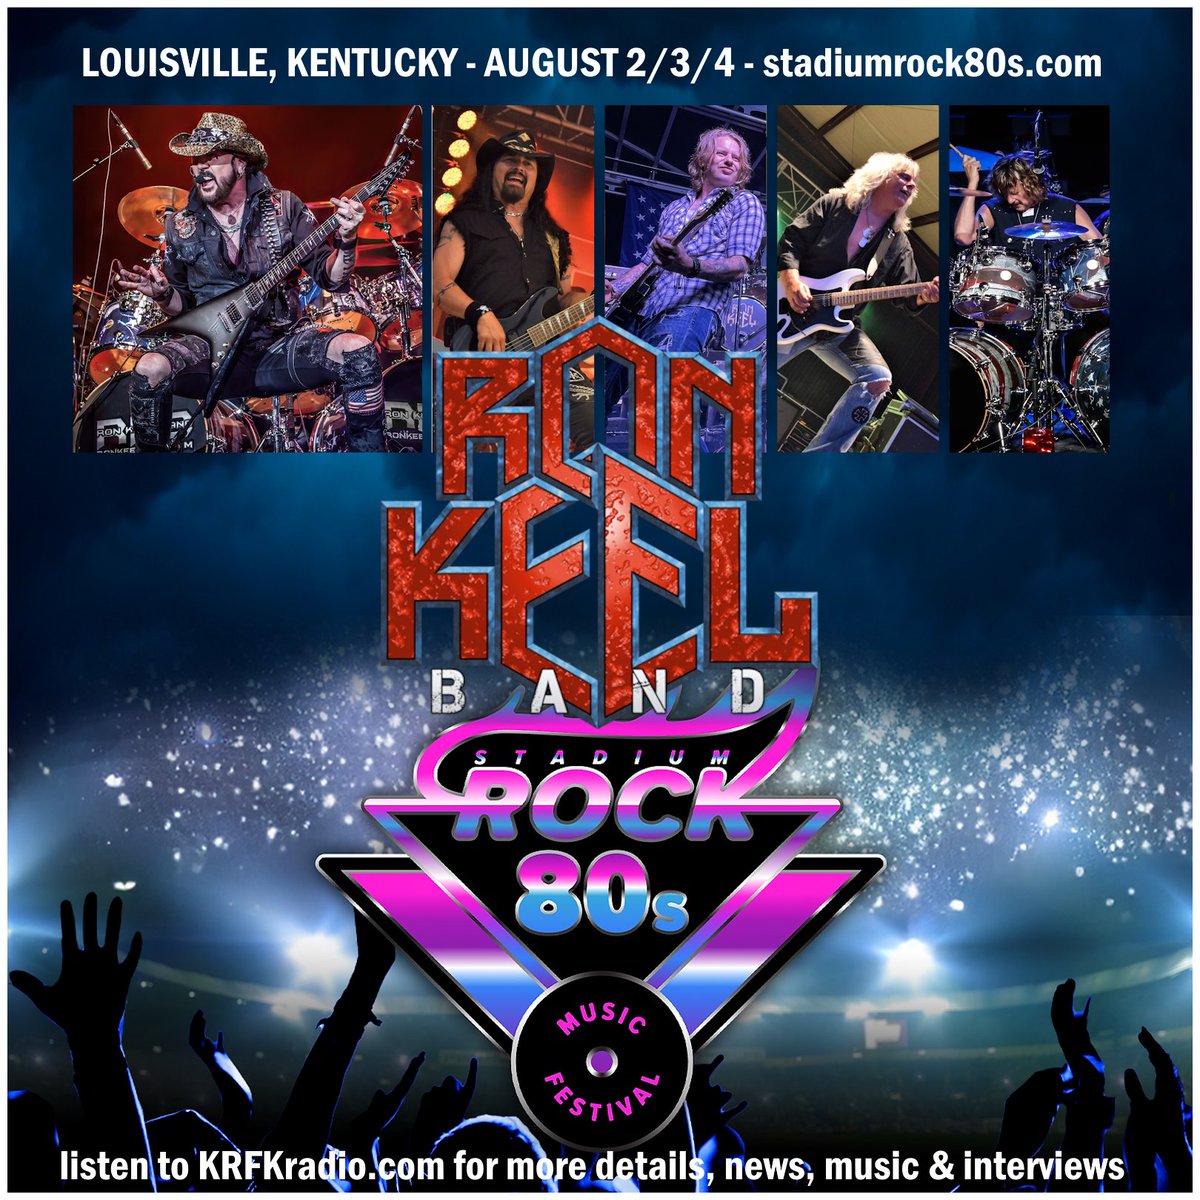 Tune in to Charlie Kendall's #METALSHOP at 11:00 AM Eastern - then stay tuned as I will speak to the lead vocalist of the Stadium Rock 80s headliner for Sunday August 4th for the official announcement. FREE mobile app, all links: KRFKradio.com